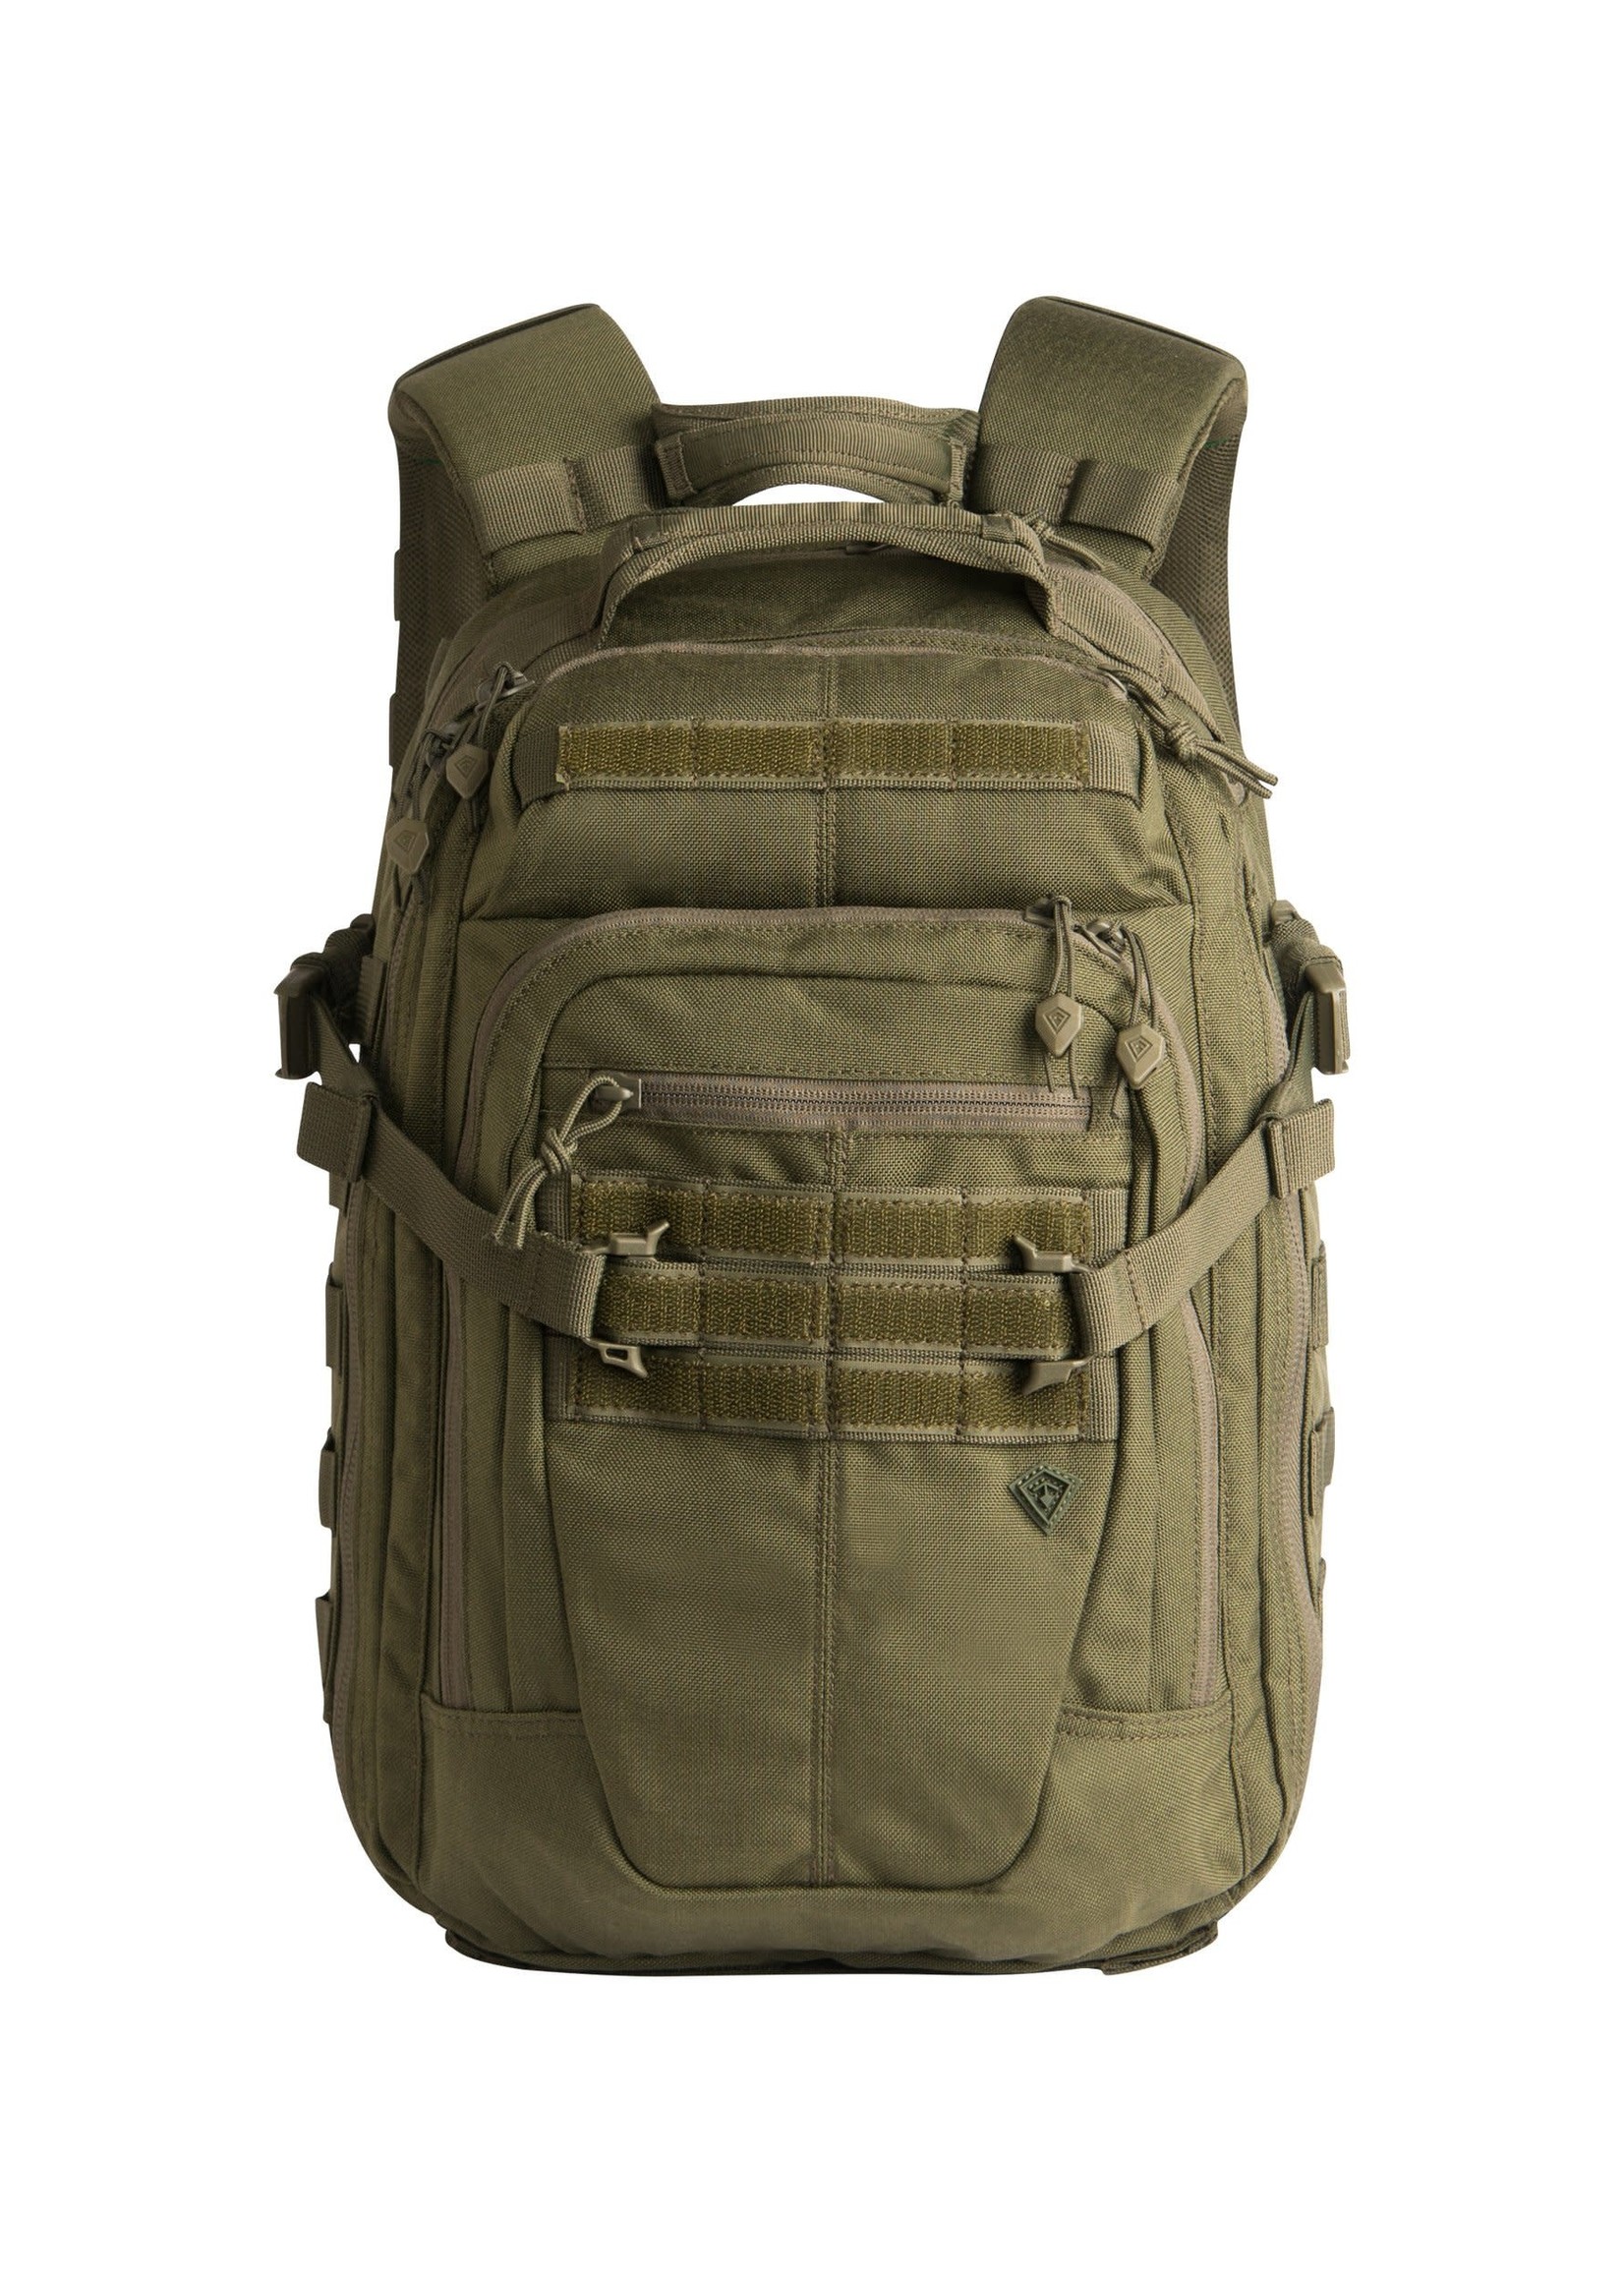 First Tactical First Tactical Specialist Half-Day Backpack 25L